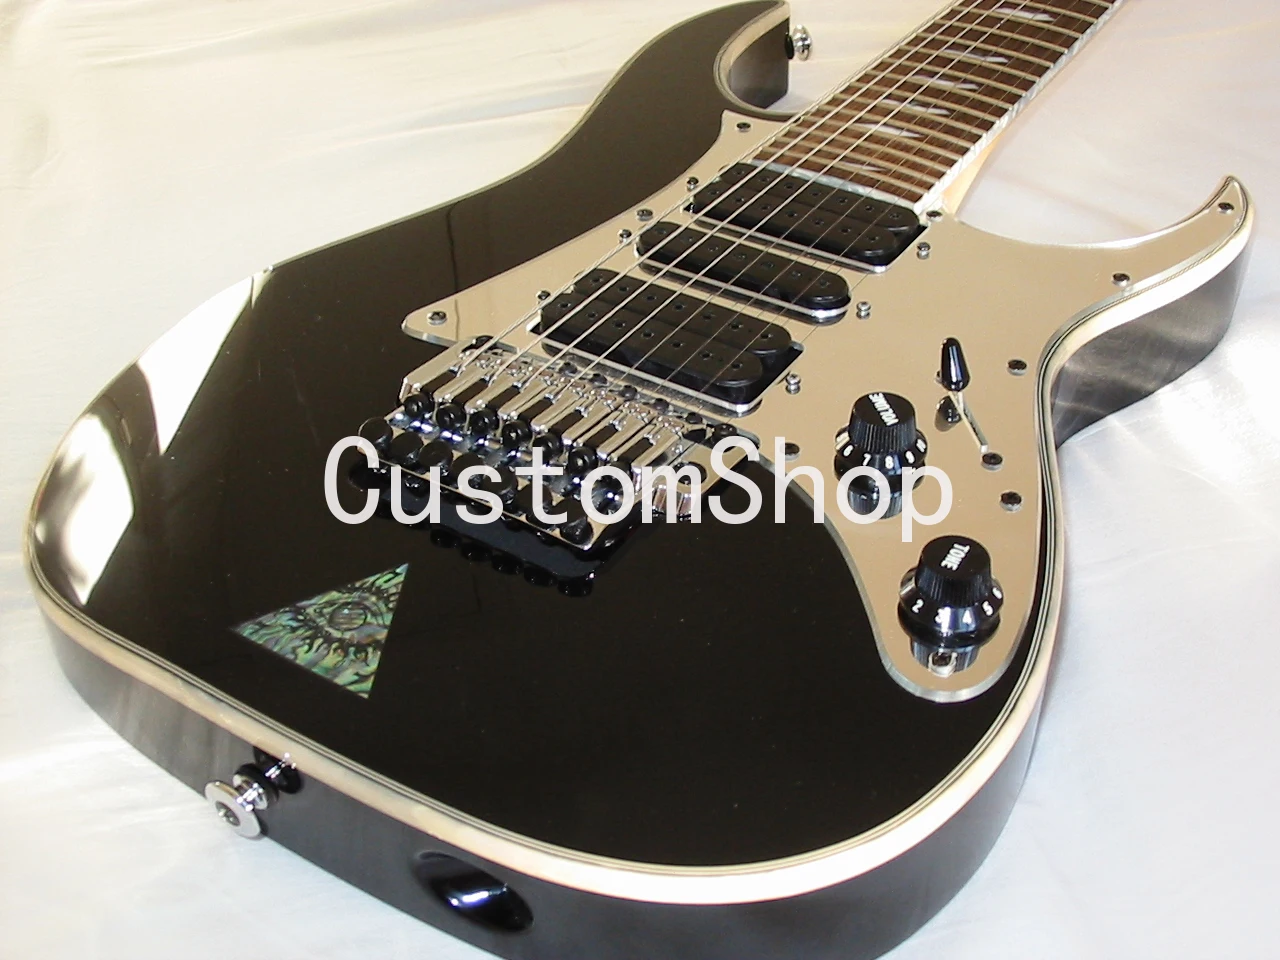 

UV777 Universe Steve 7 String Black Electric Guitar Mirror Pickguard, Floyd Rose Tremolo, Abalone Disappearing Pyramid Inlay,